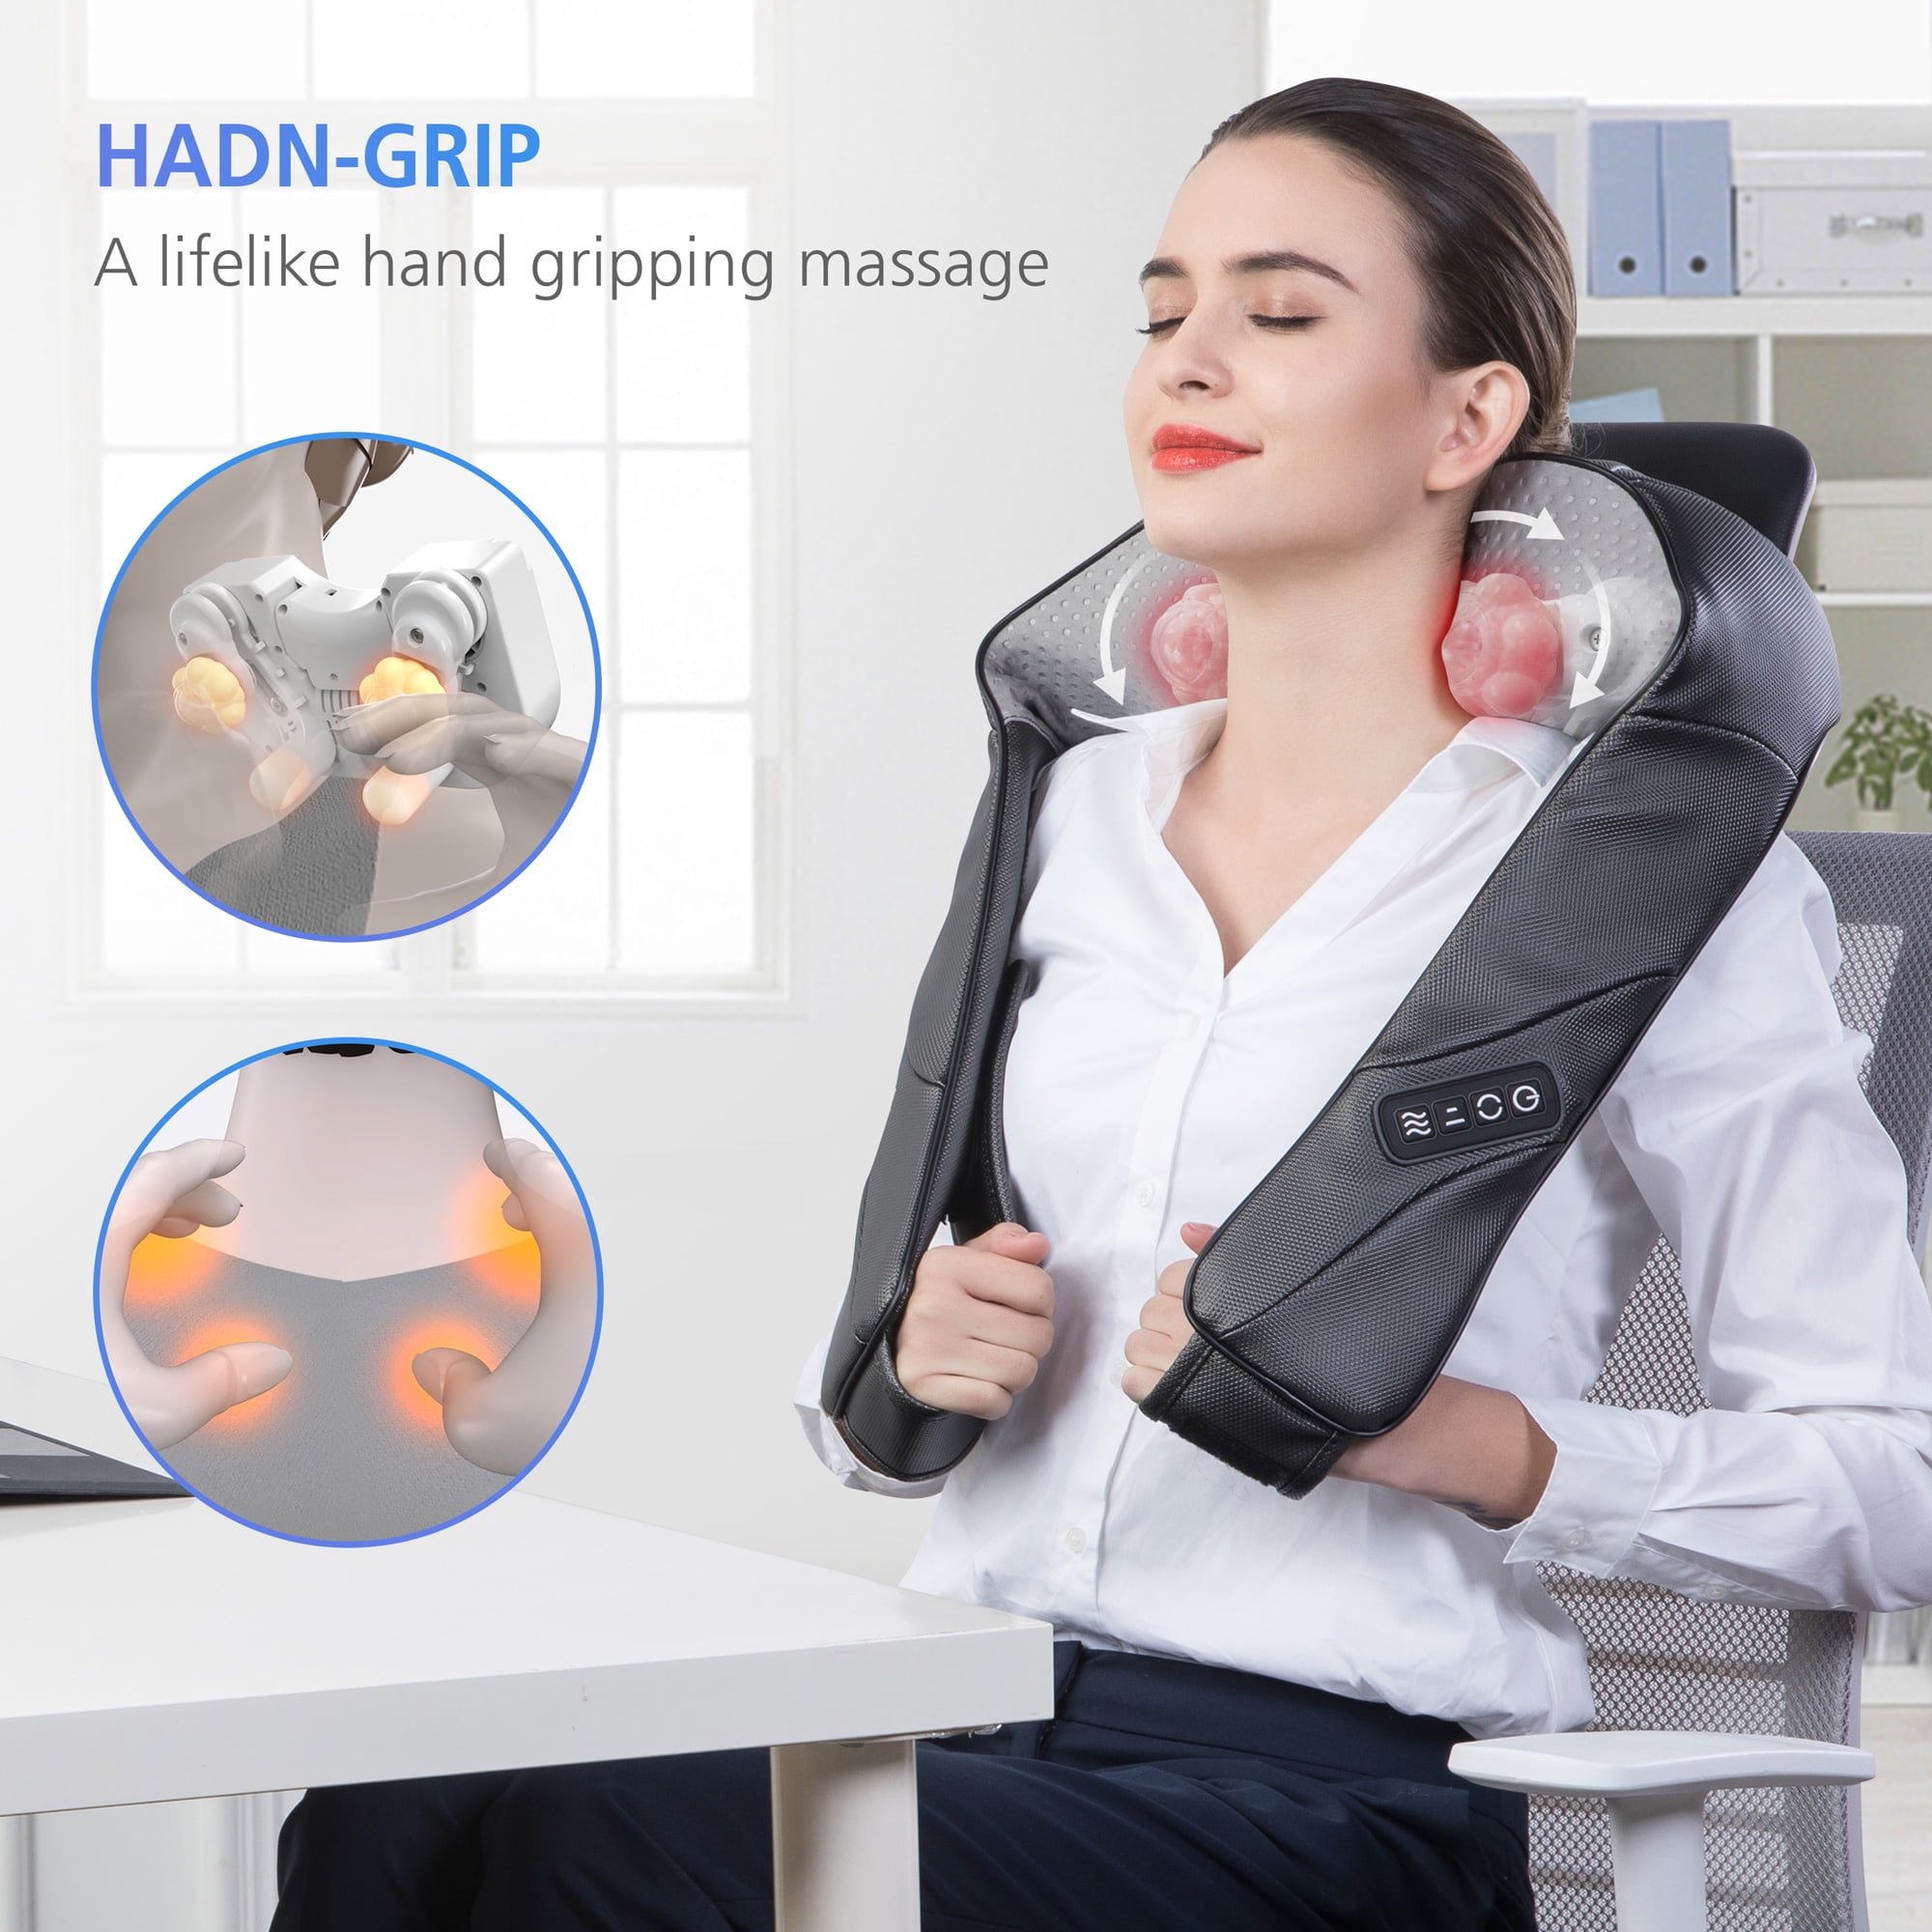 COMFIER Portable Heated Neck Massager for Pain Relief,EMS Intelligent  Electric Pulse Neck Massager w…See more COMFIER Portable Heated Neck  Massager